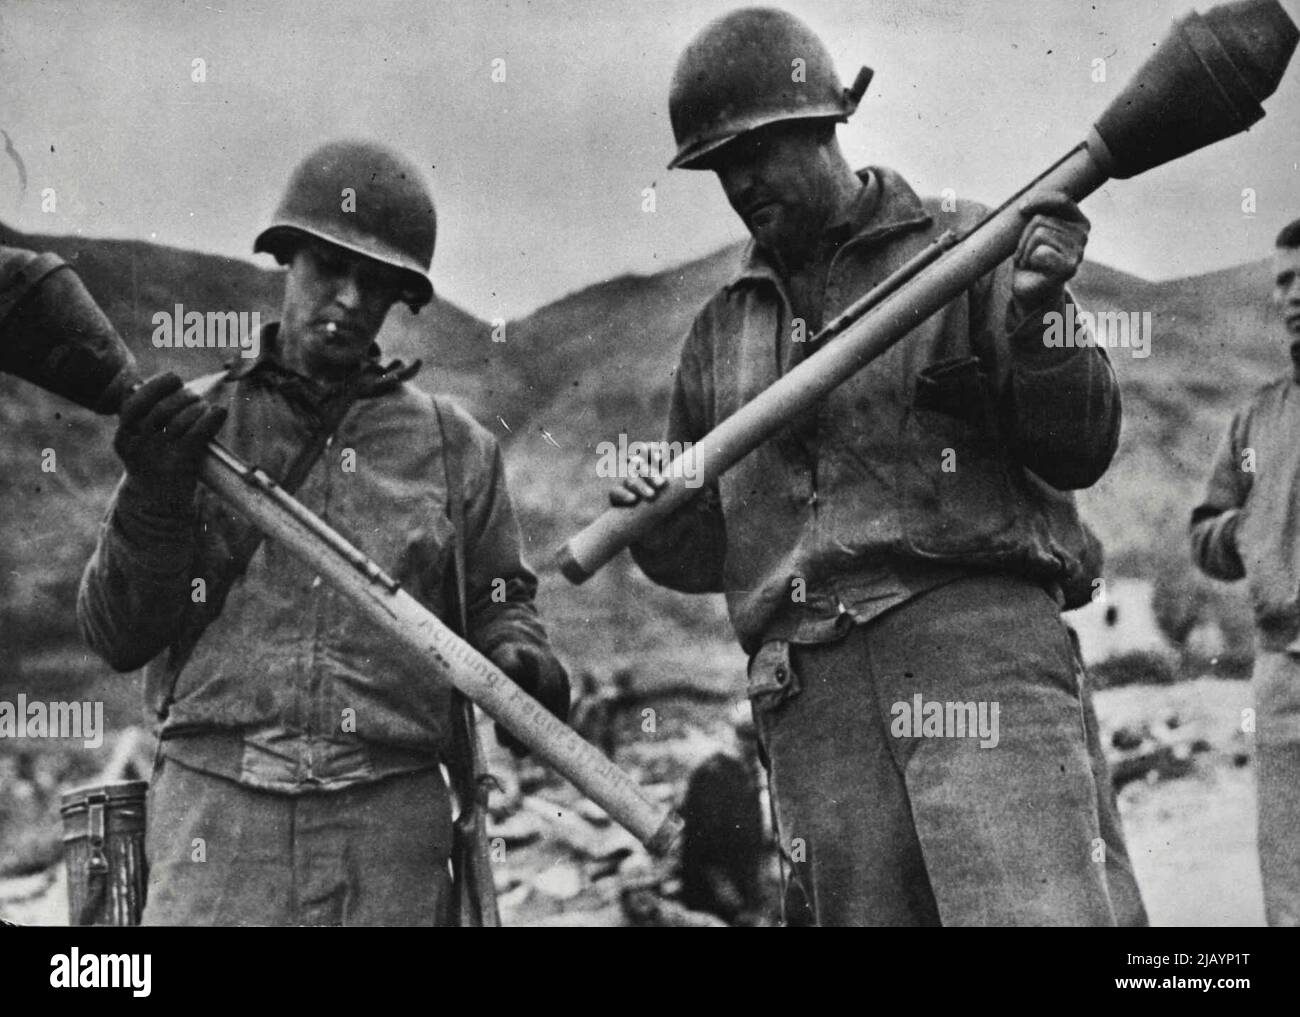 U.S. Soldiers Examine German Bazooka -- German, Bazooka, imitations of the American anti-tank guns, are examined by two U.S. soldiers after the weapons were captured during fighting on the outskirts of Cassino in Western Italy. The bazooka was developed in the United States as an infantryman's anti-tank weapon. March 20, 1944. Stock Photo